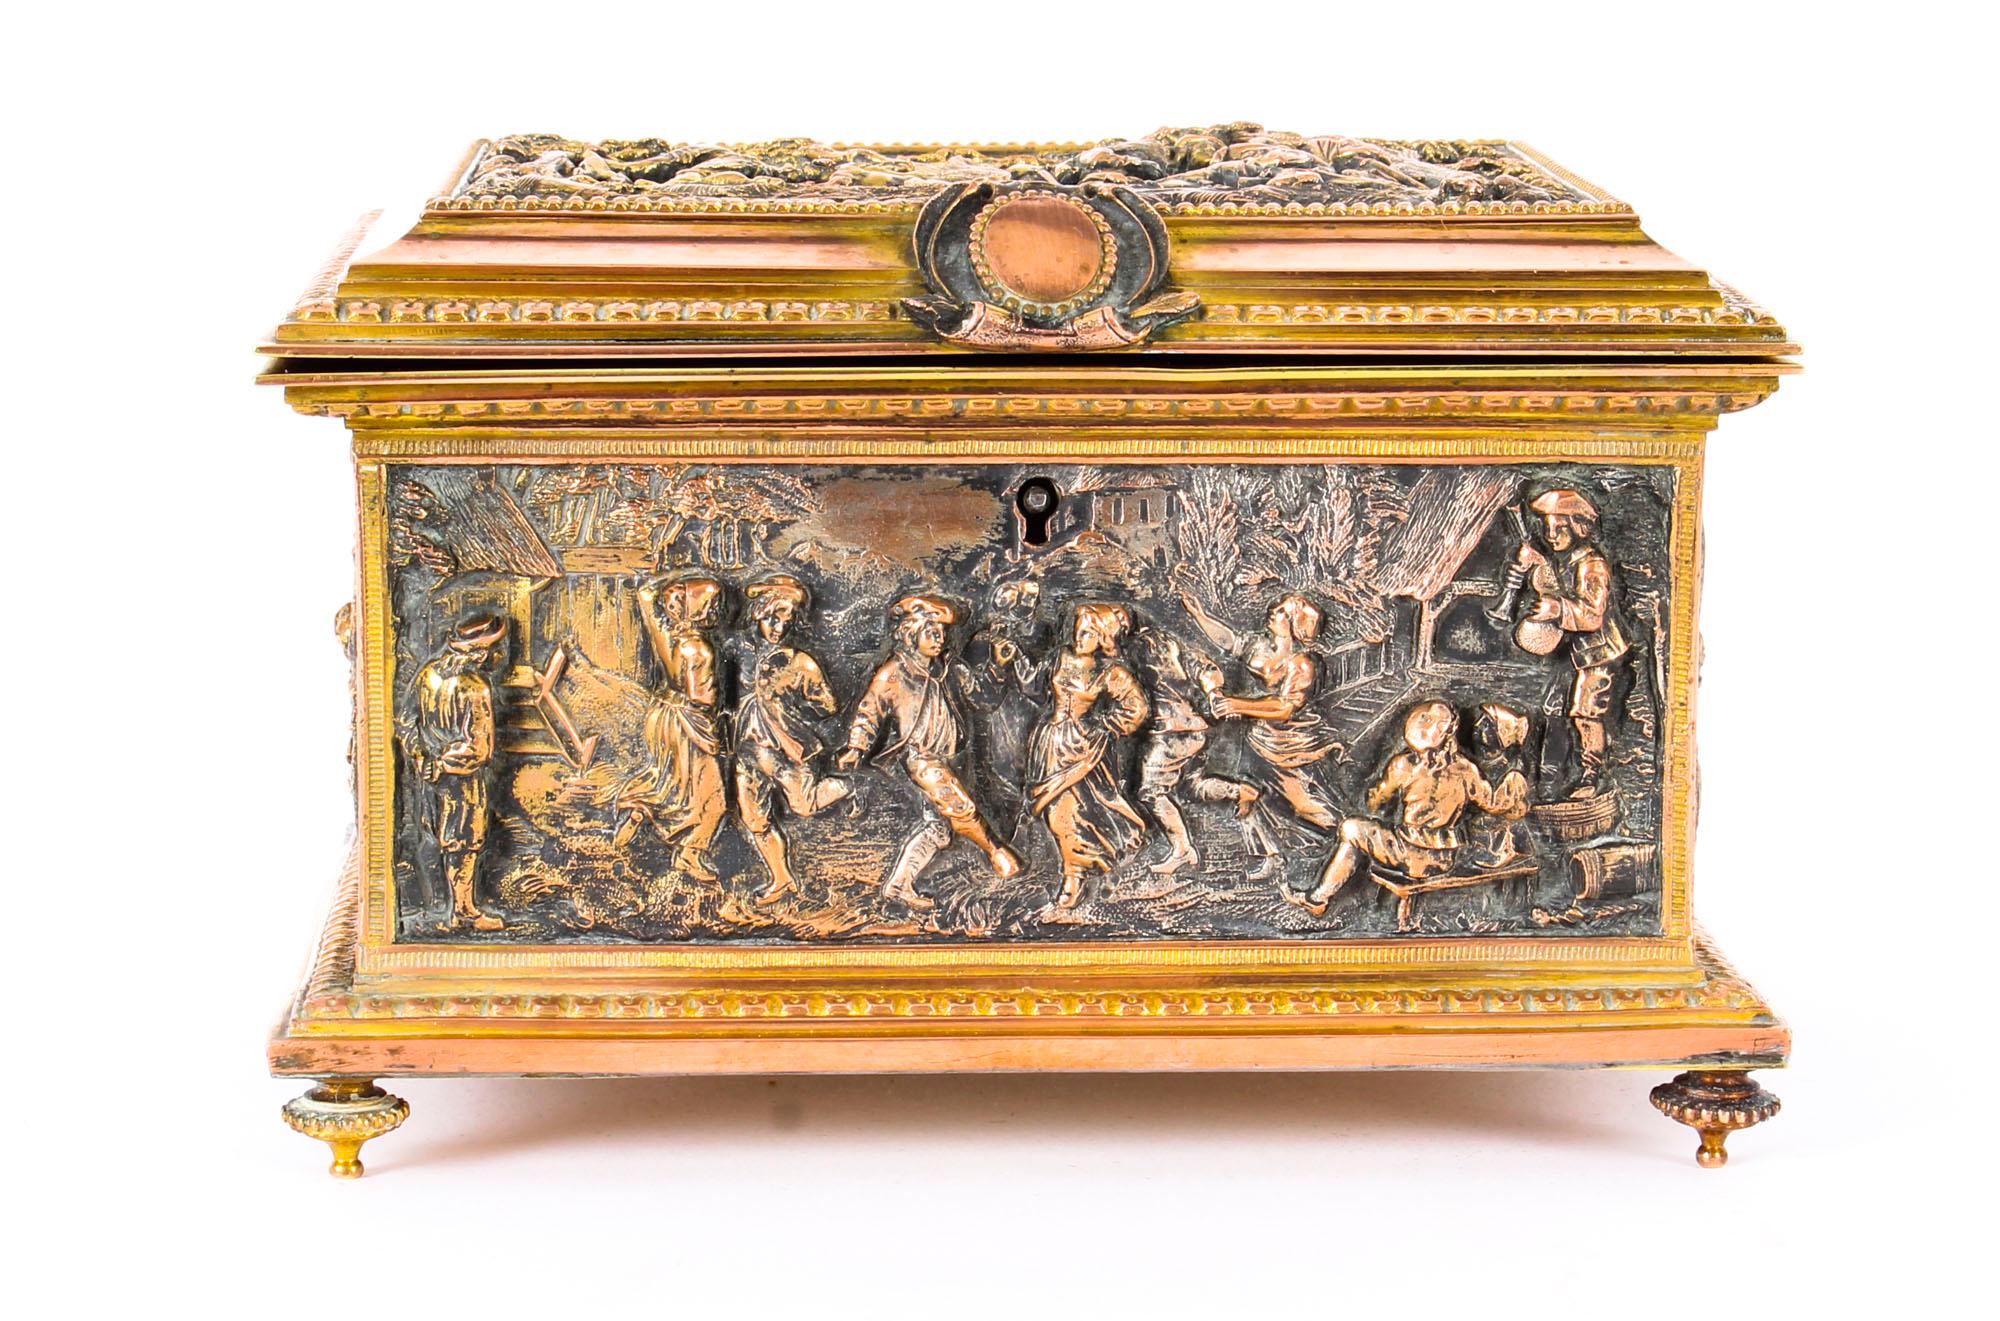 This is a magnificent exceptional quality antique French gilt brass and gilt bronze jewellery casket, bearing the makers mark AB Paris, circa 1880 in date.

This stunning casket is rectangular in shape and is raised on four delightful turned small